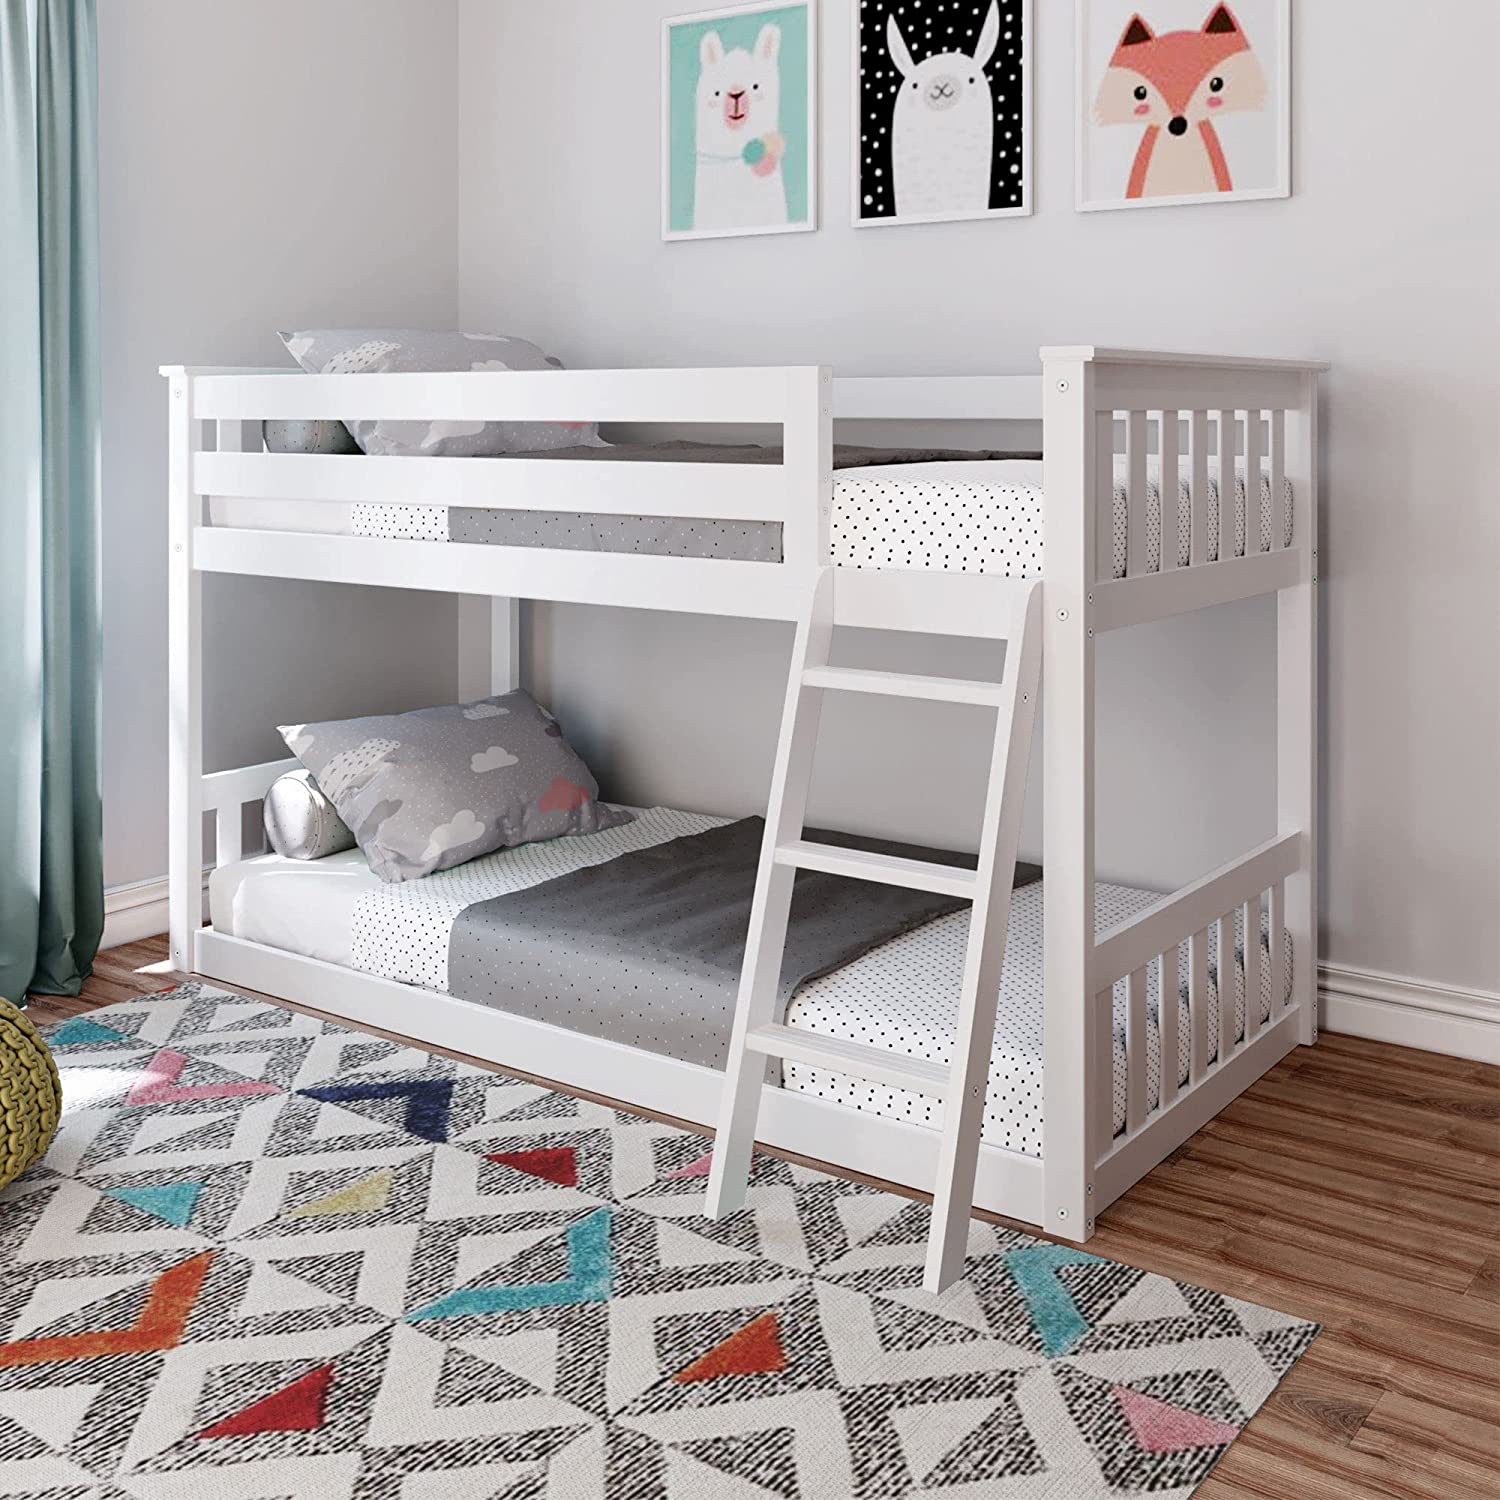 Bunk bed for airbnb